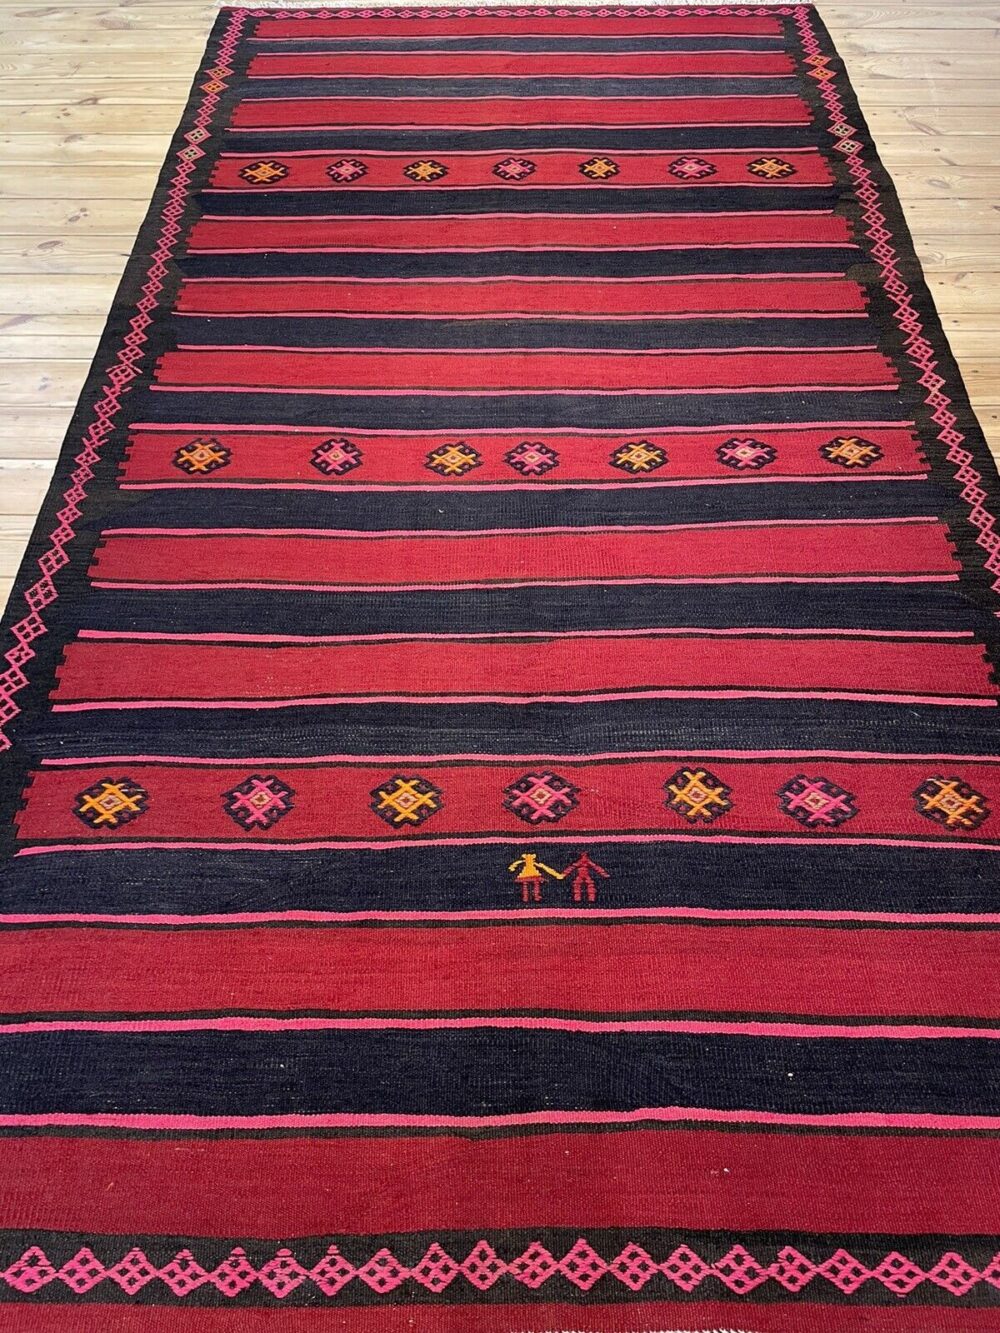 HAND KNOTTED KILIM SUPER QUALITY RED FROM PERSIA 295X160CM221014 PERSIAN RUG ORIENTAL RUG